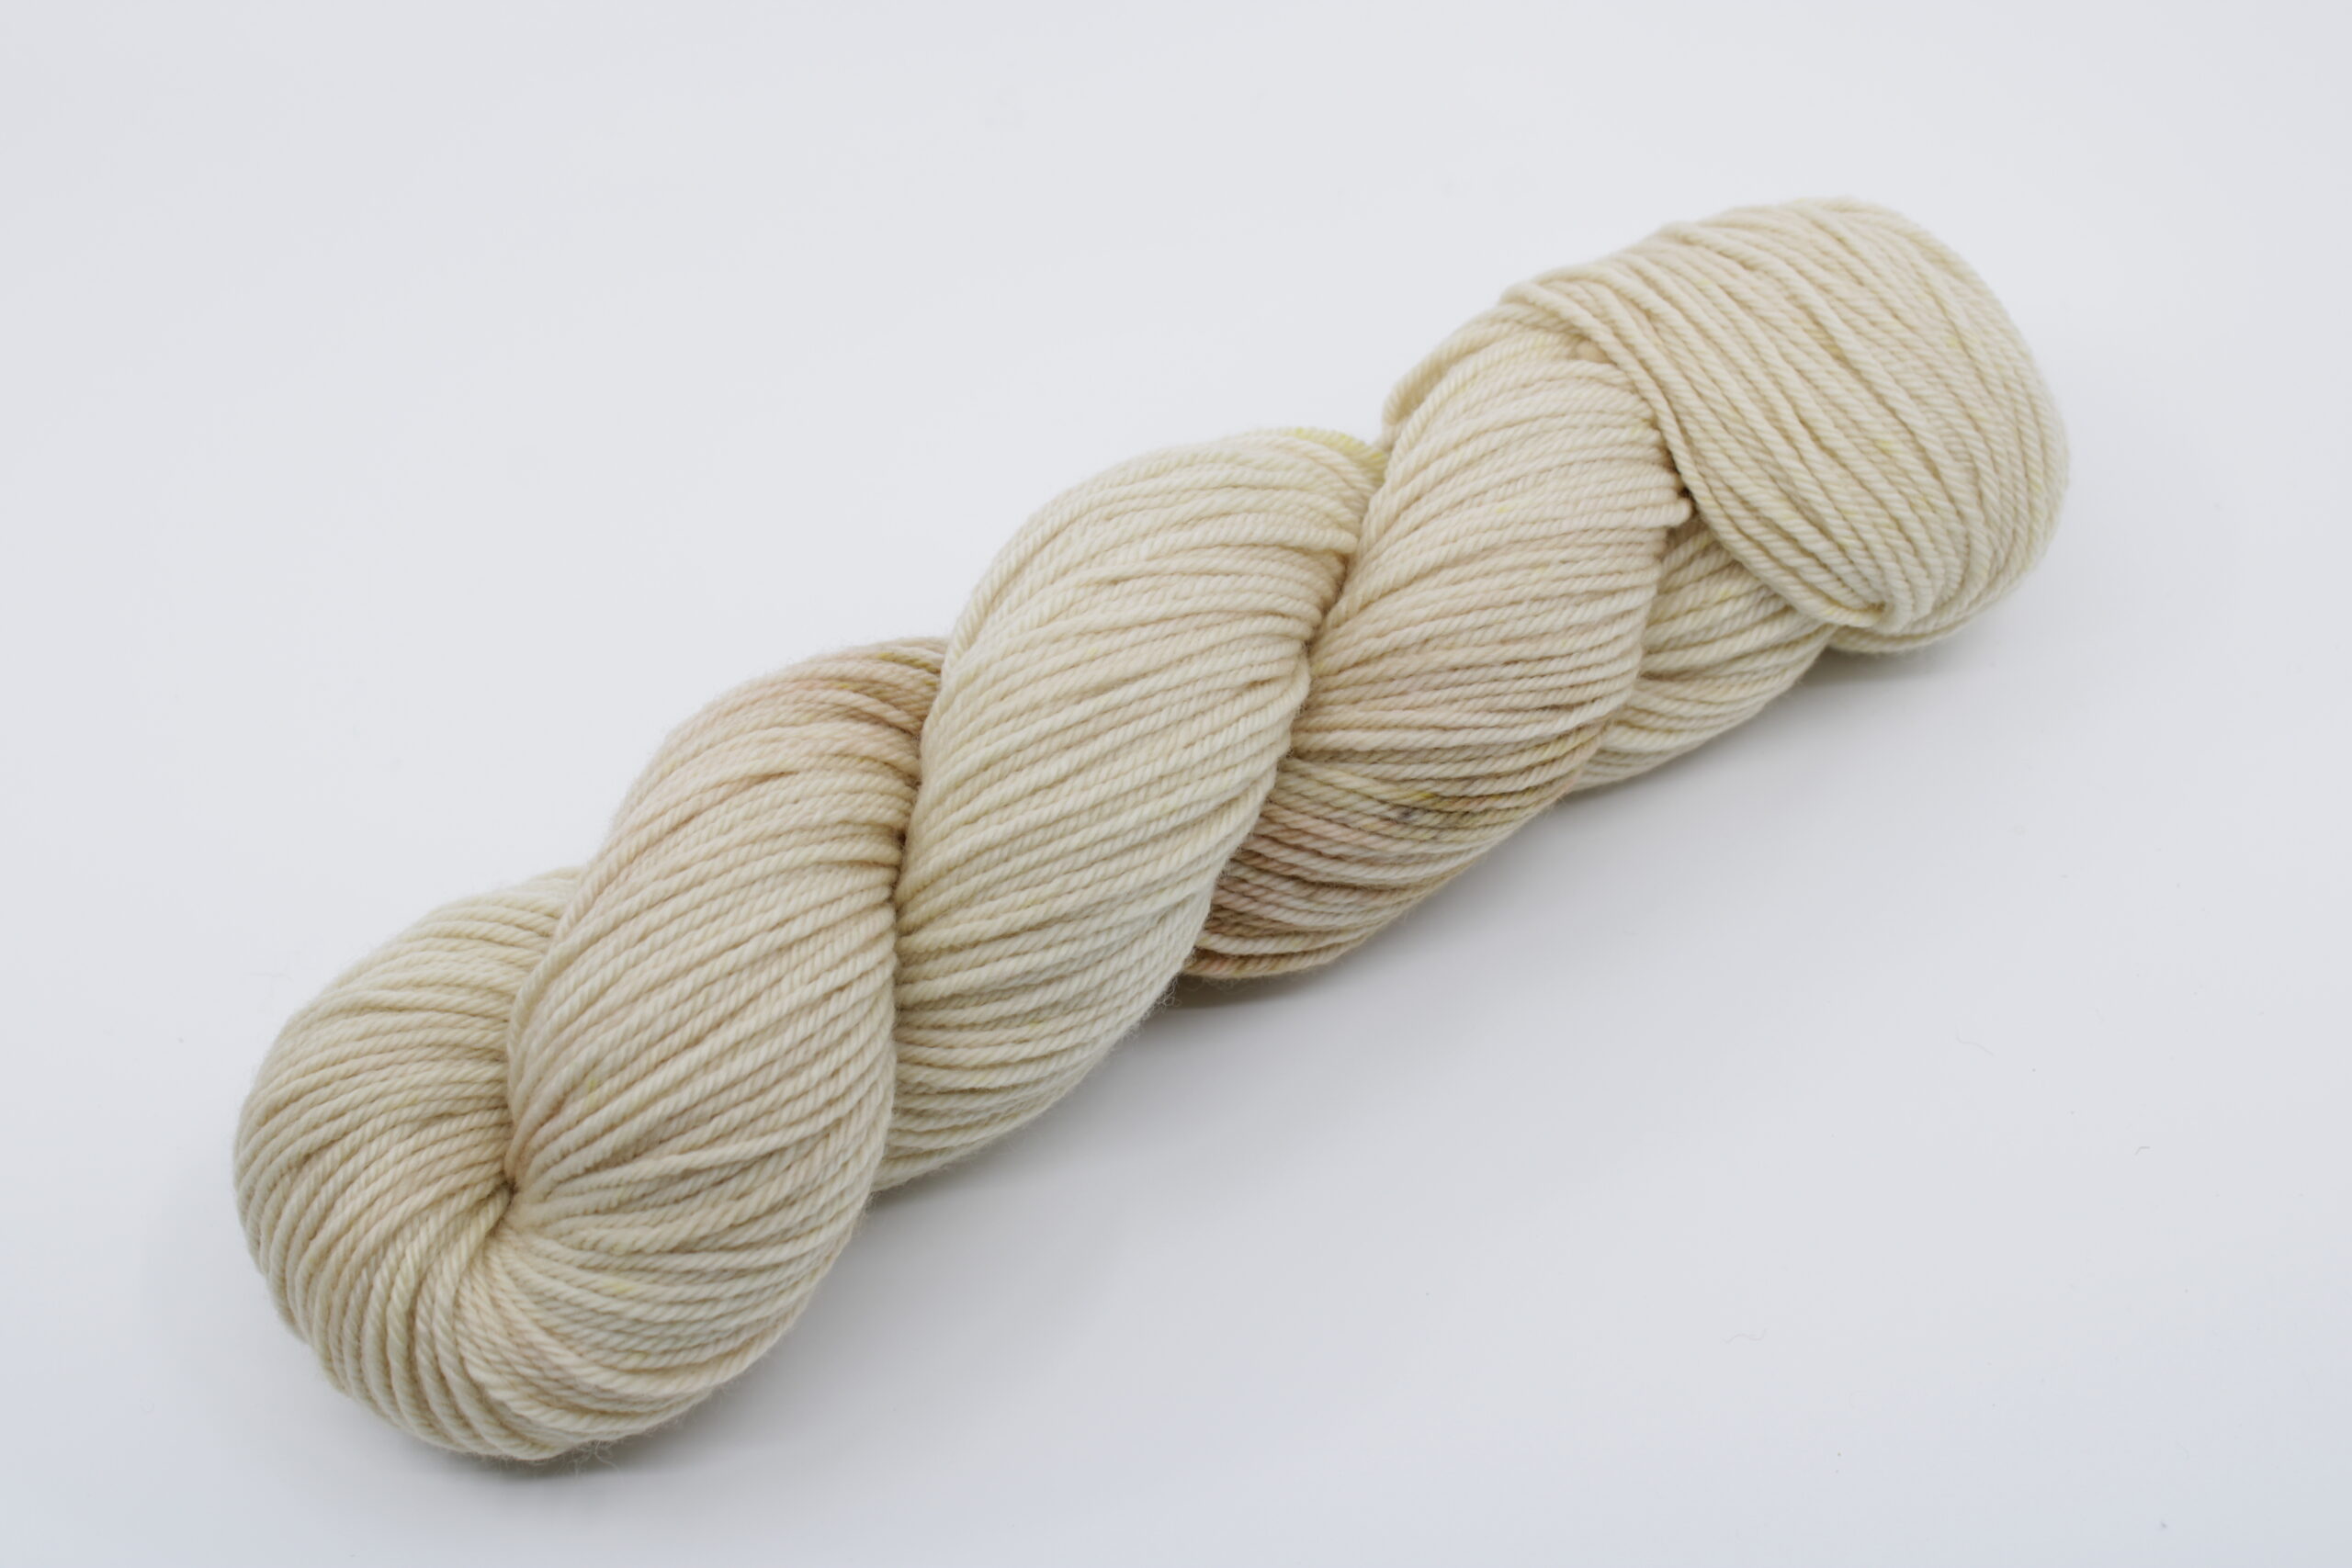 Folcon worsted base. Wool 100% untreated merino. Trio of colors: almond. Color: Douglas.